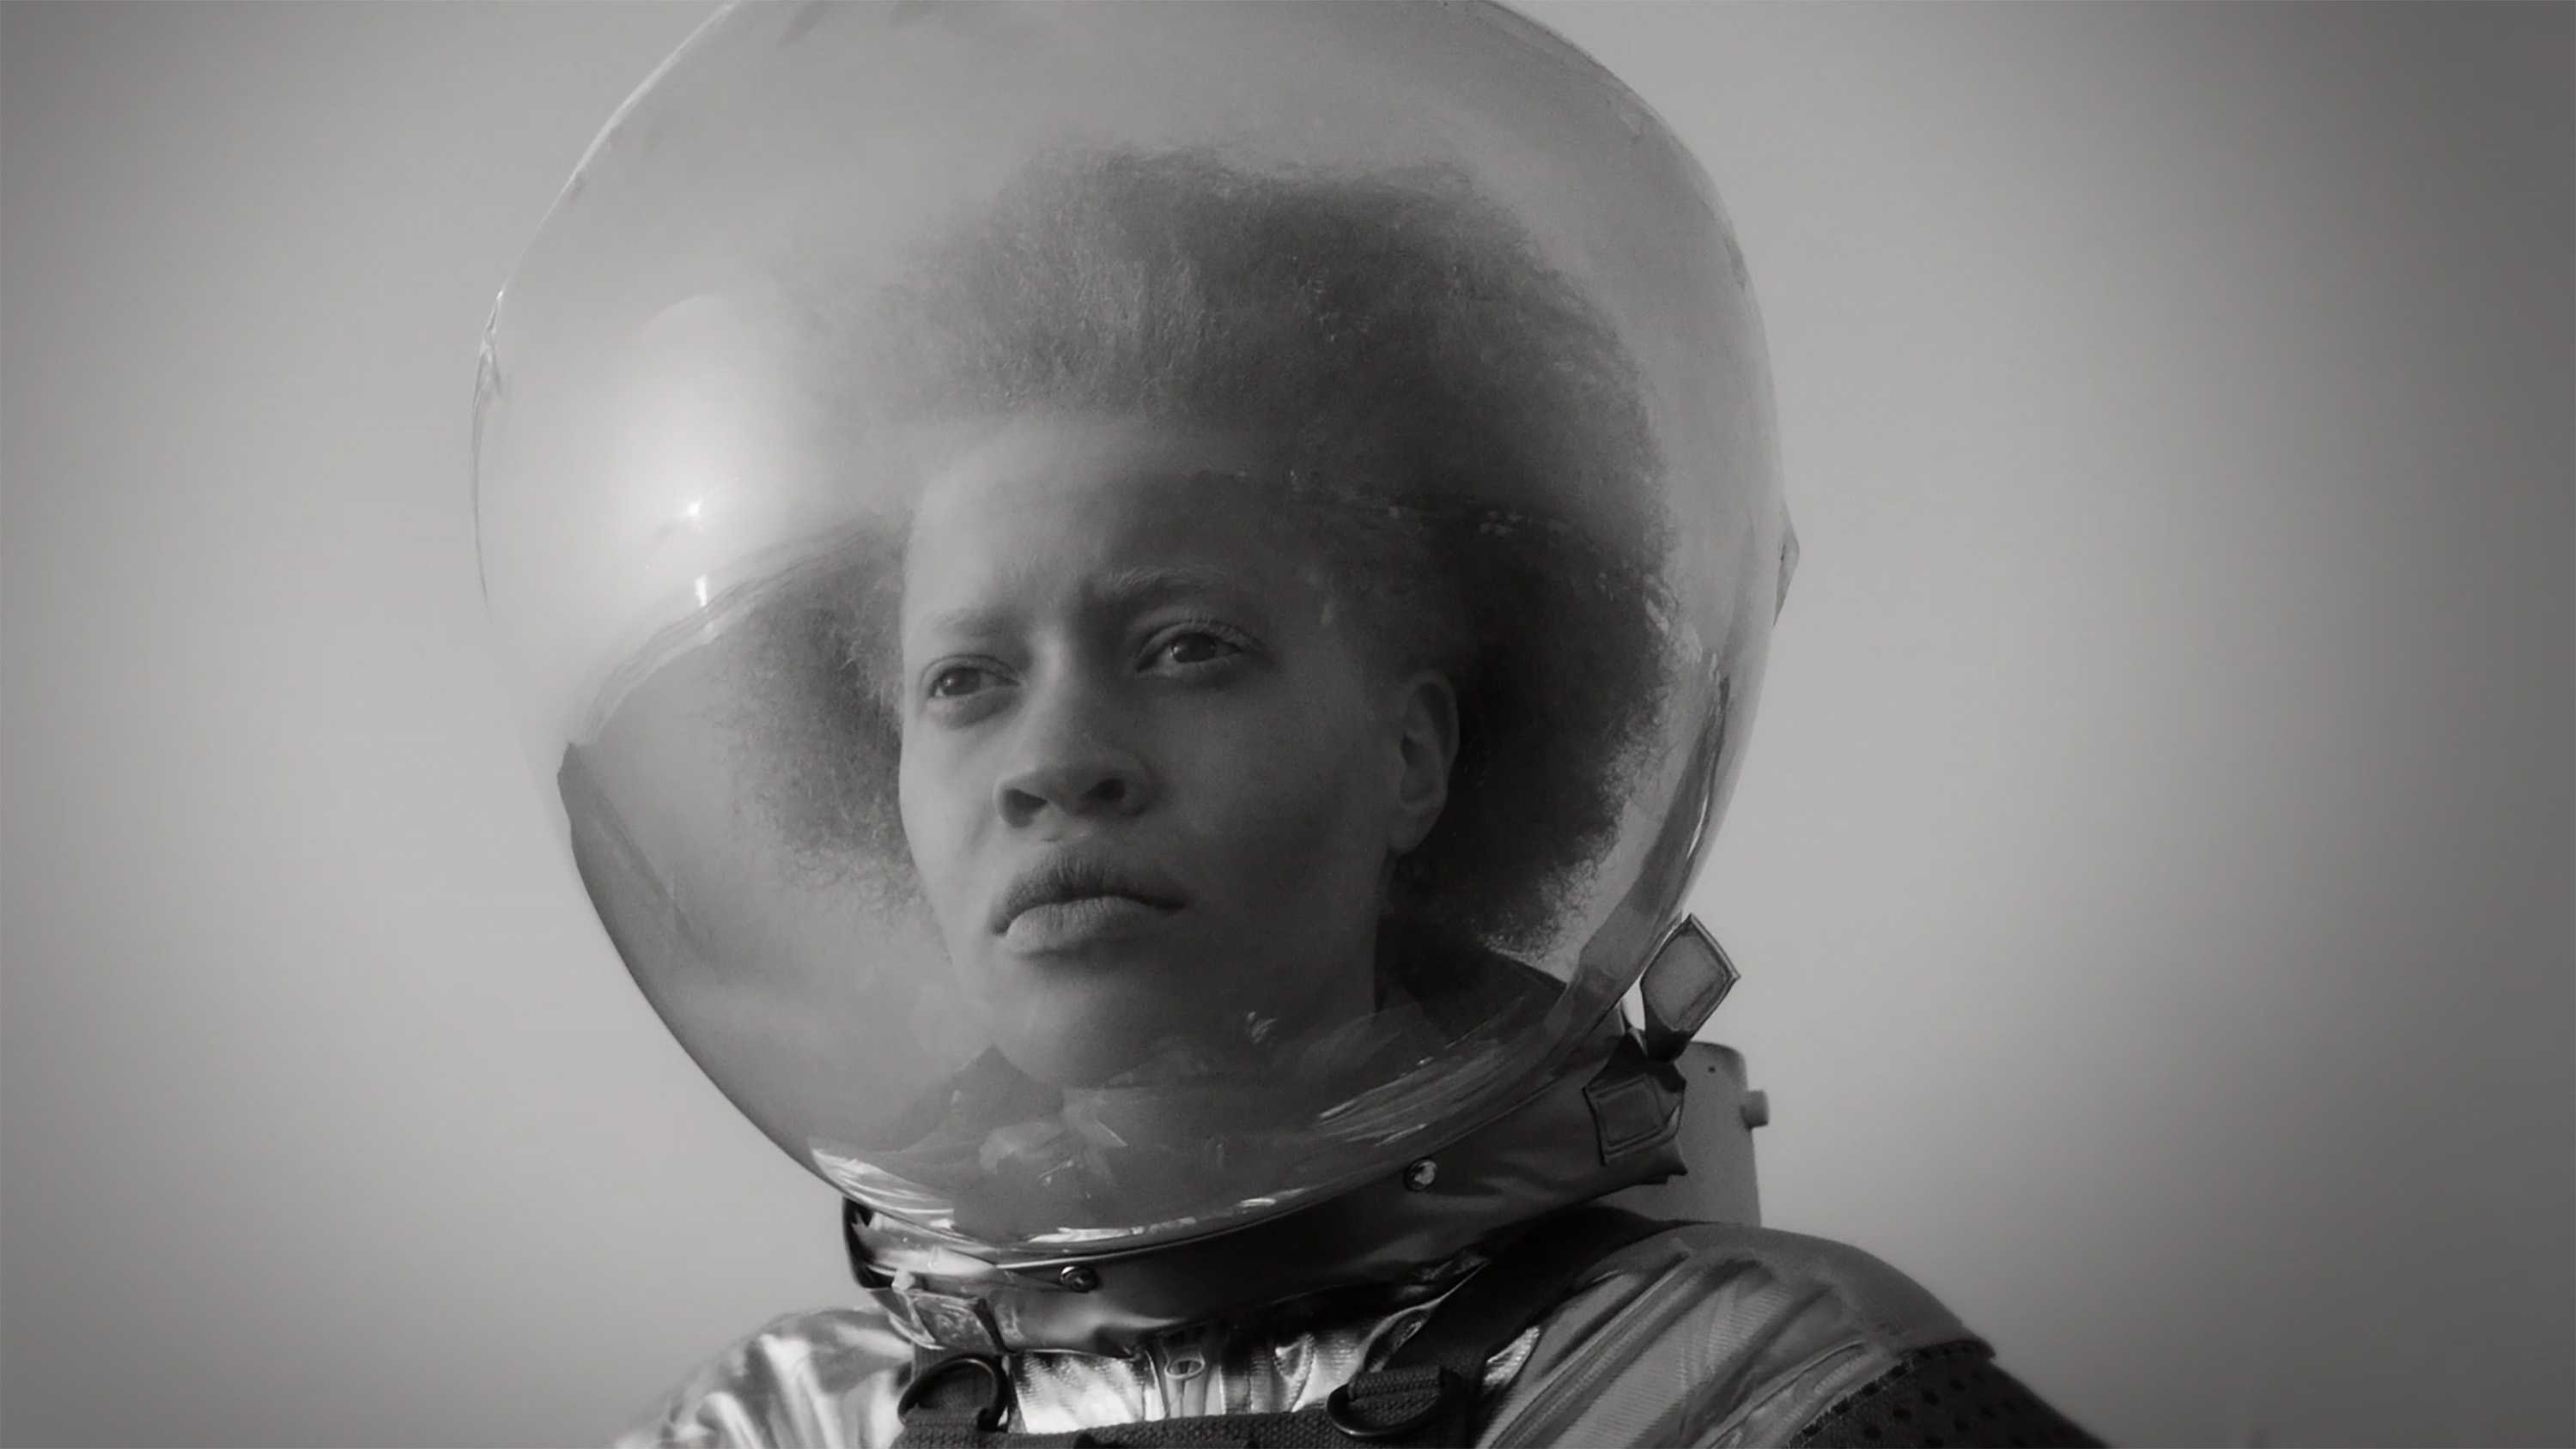 Black and white still image of a black woman in a space suit and helmet.